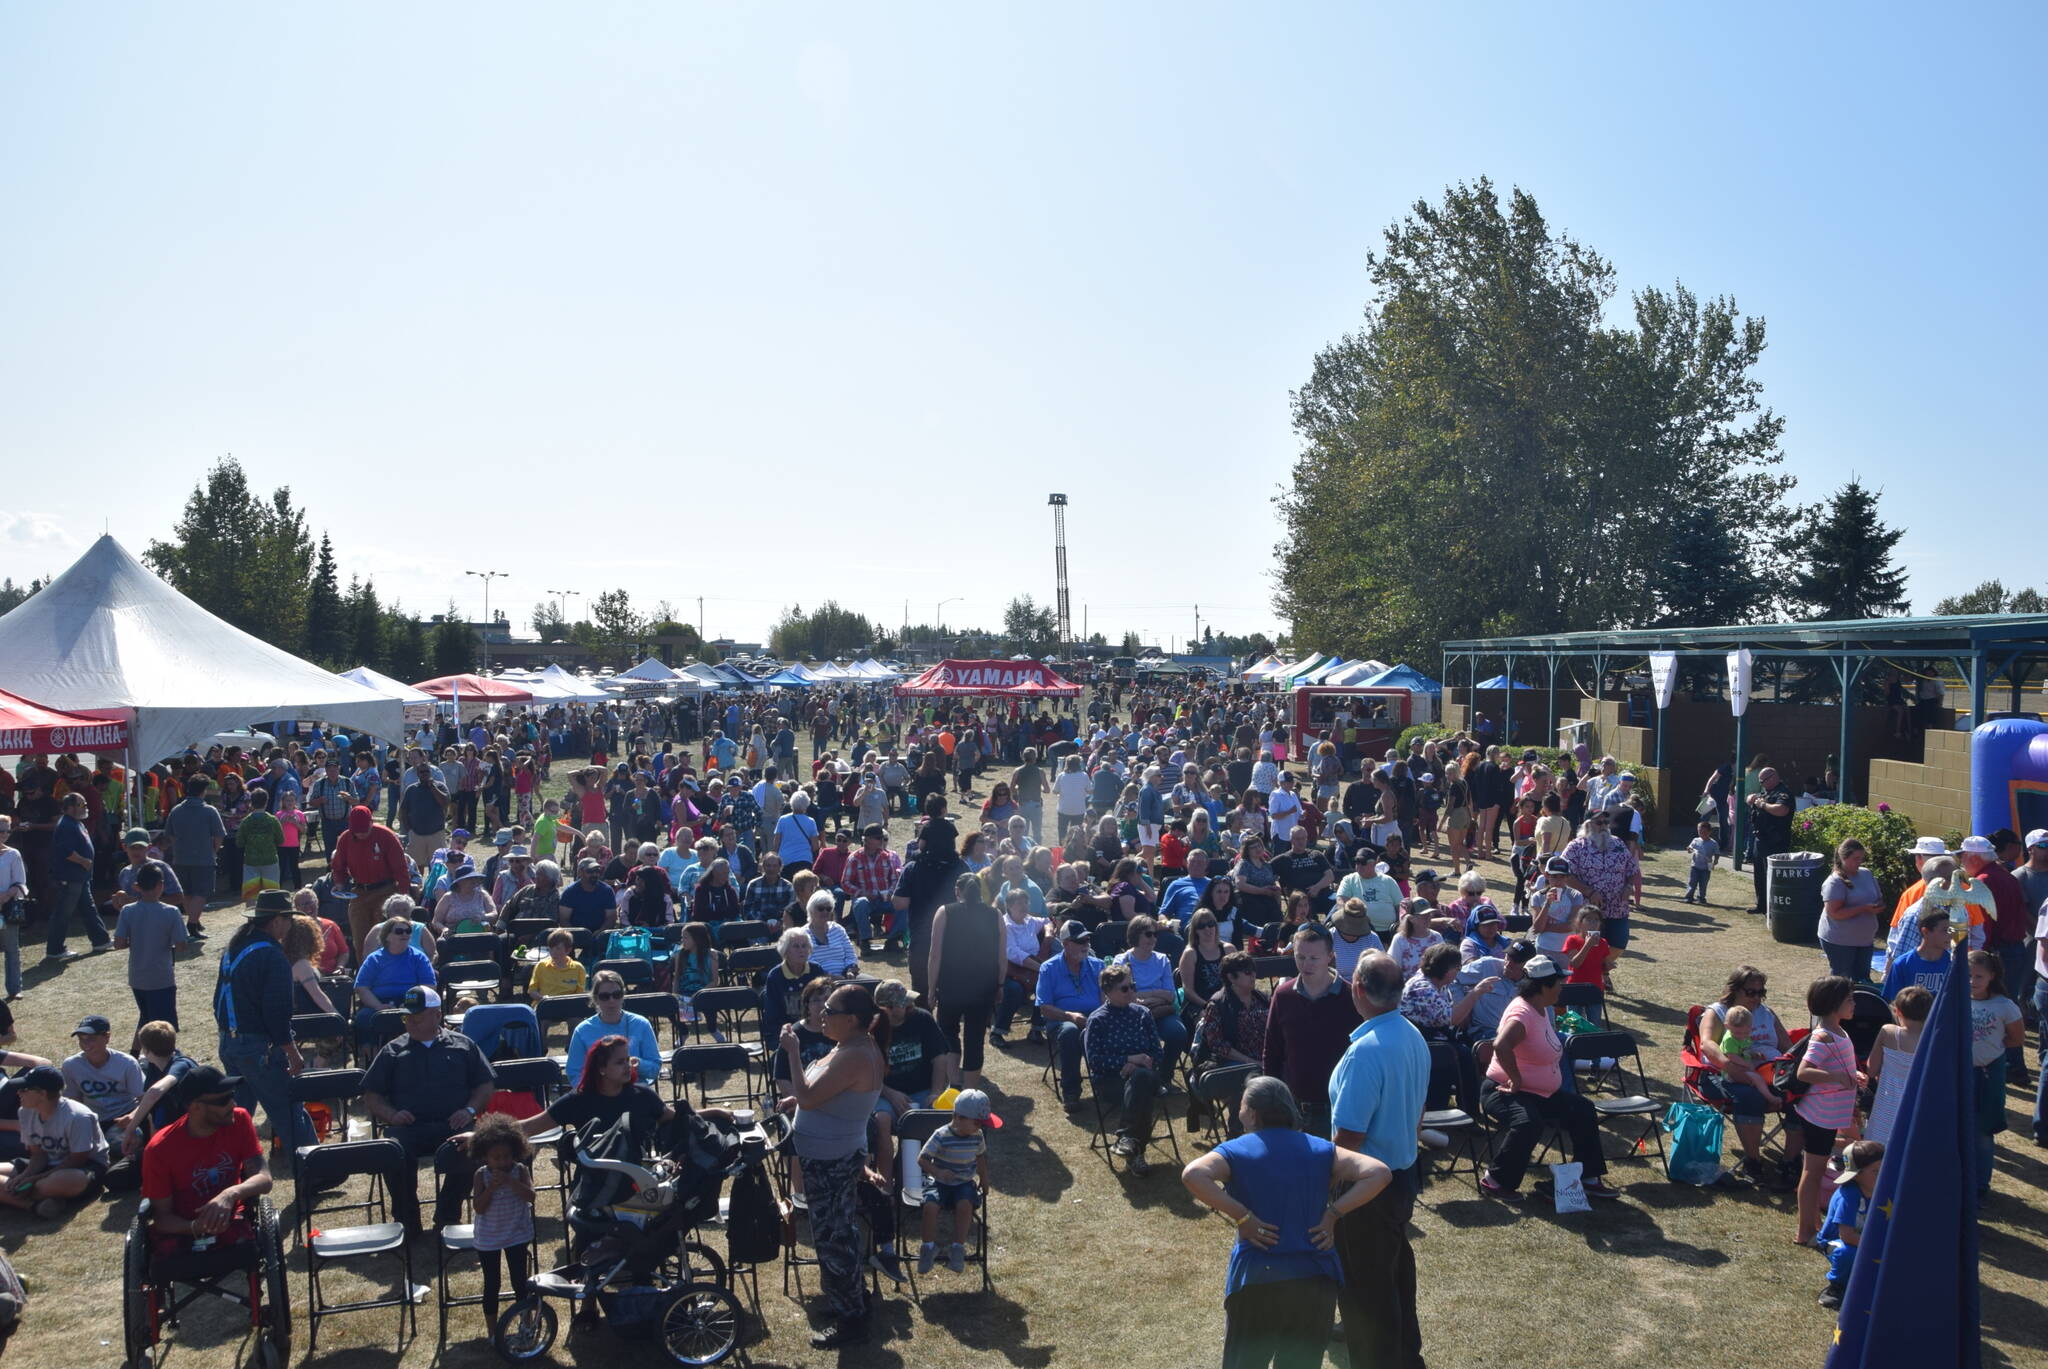 The crowd can be seen from the main stage at Kenai’s Industry Appreciation Day at the Kenai Park Strip on Aug. 24, 2019. (Photo by Brian Mazurek/Peninsula Clarion)